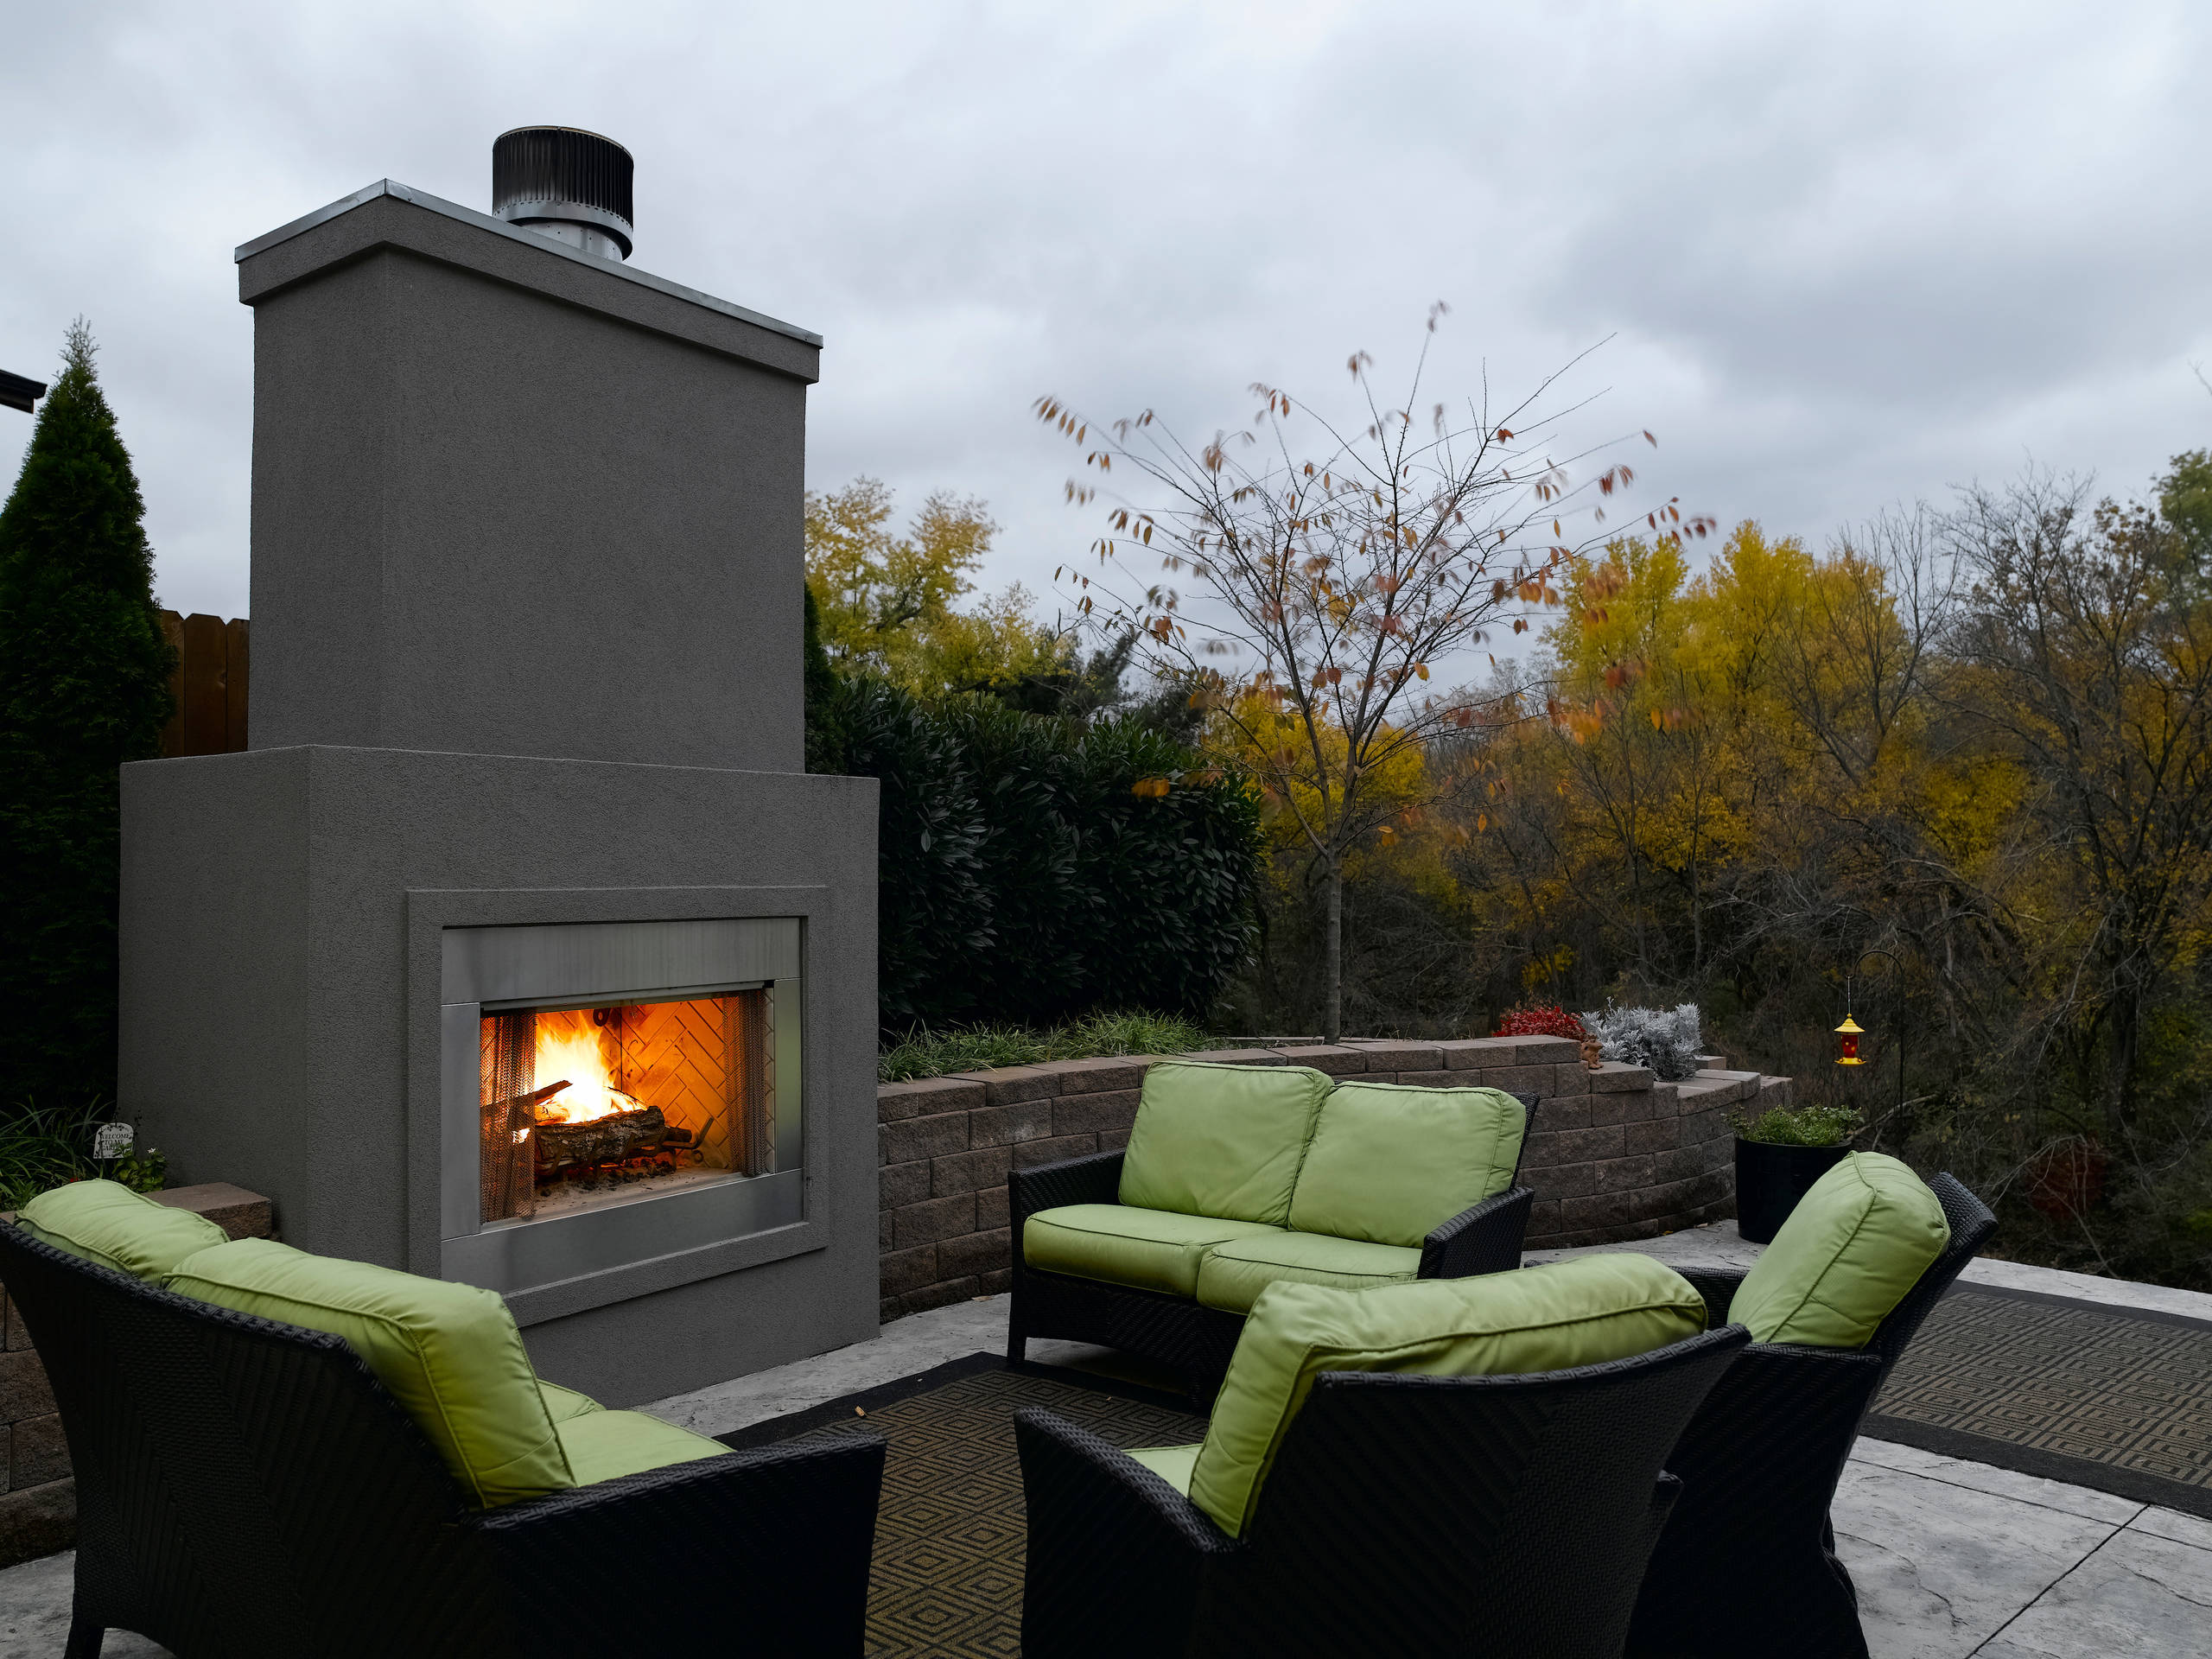 Outdoor Fireplace and Patio